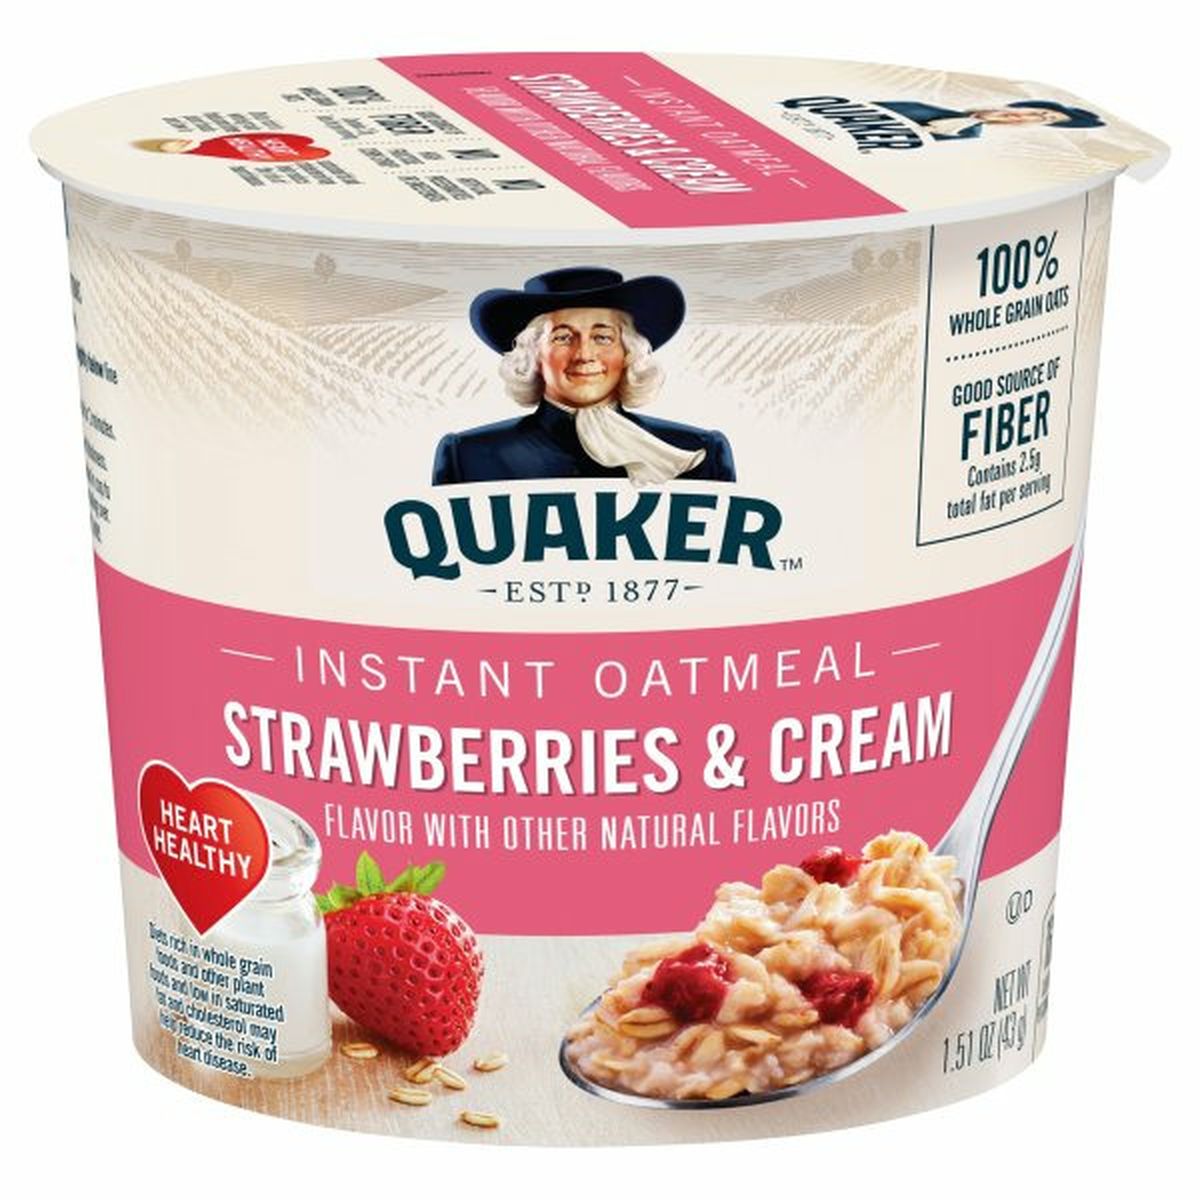 Calories in Quaker Instant Oatmeal Instant Oats Hot Cereal, Strawberries & Cream